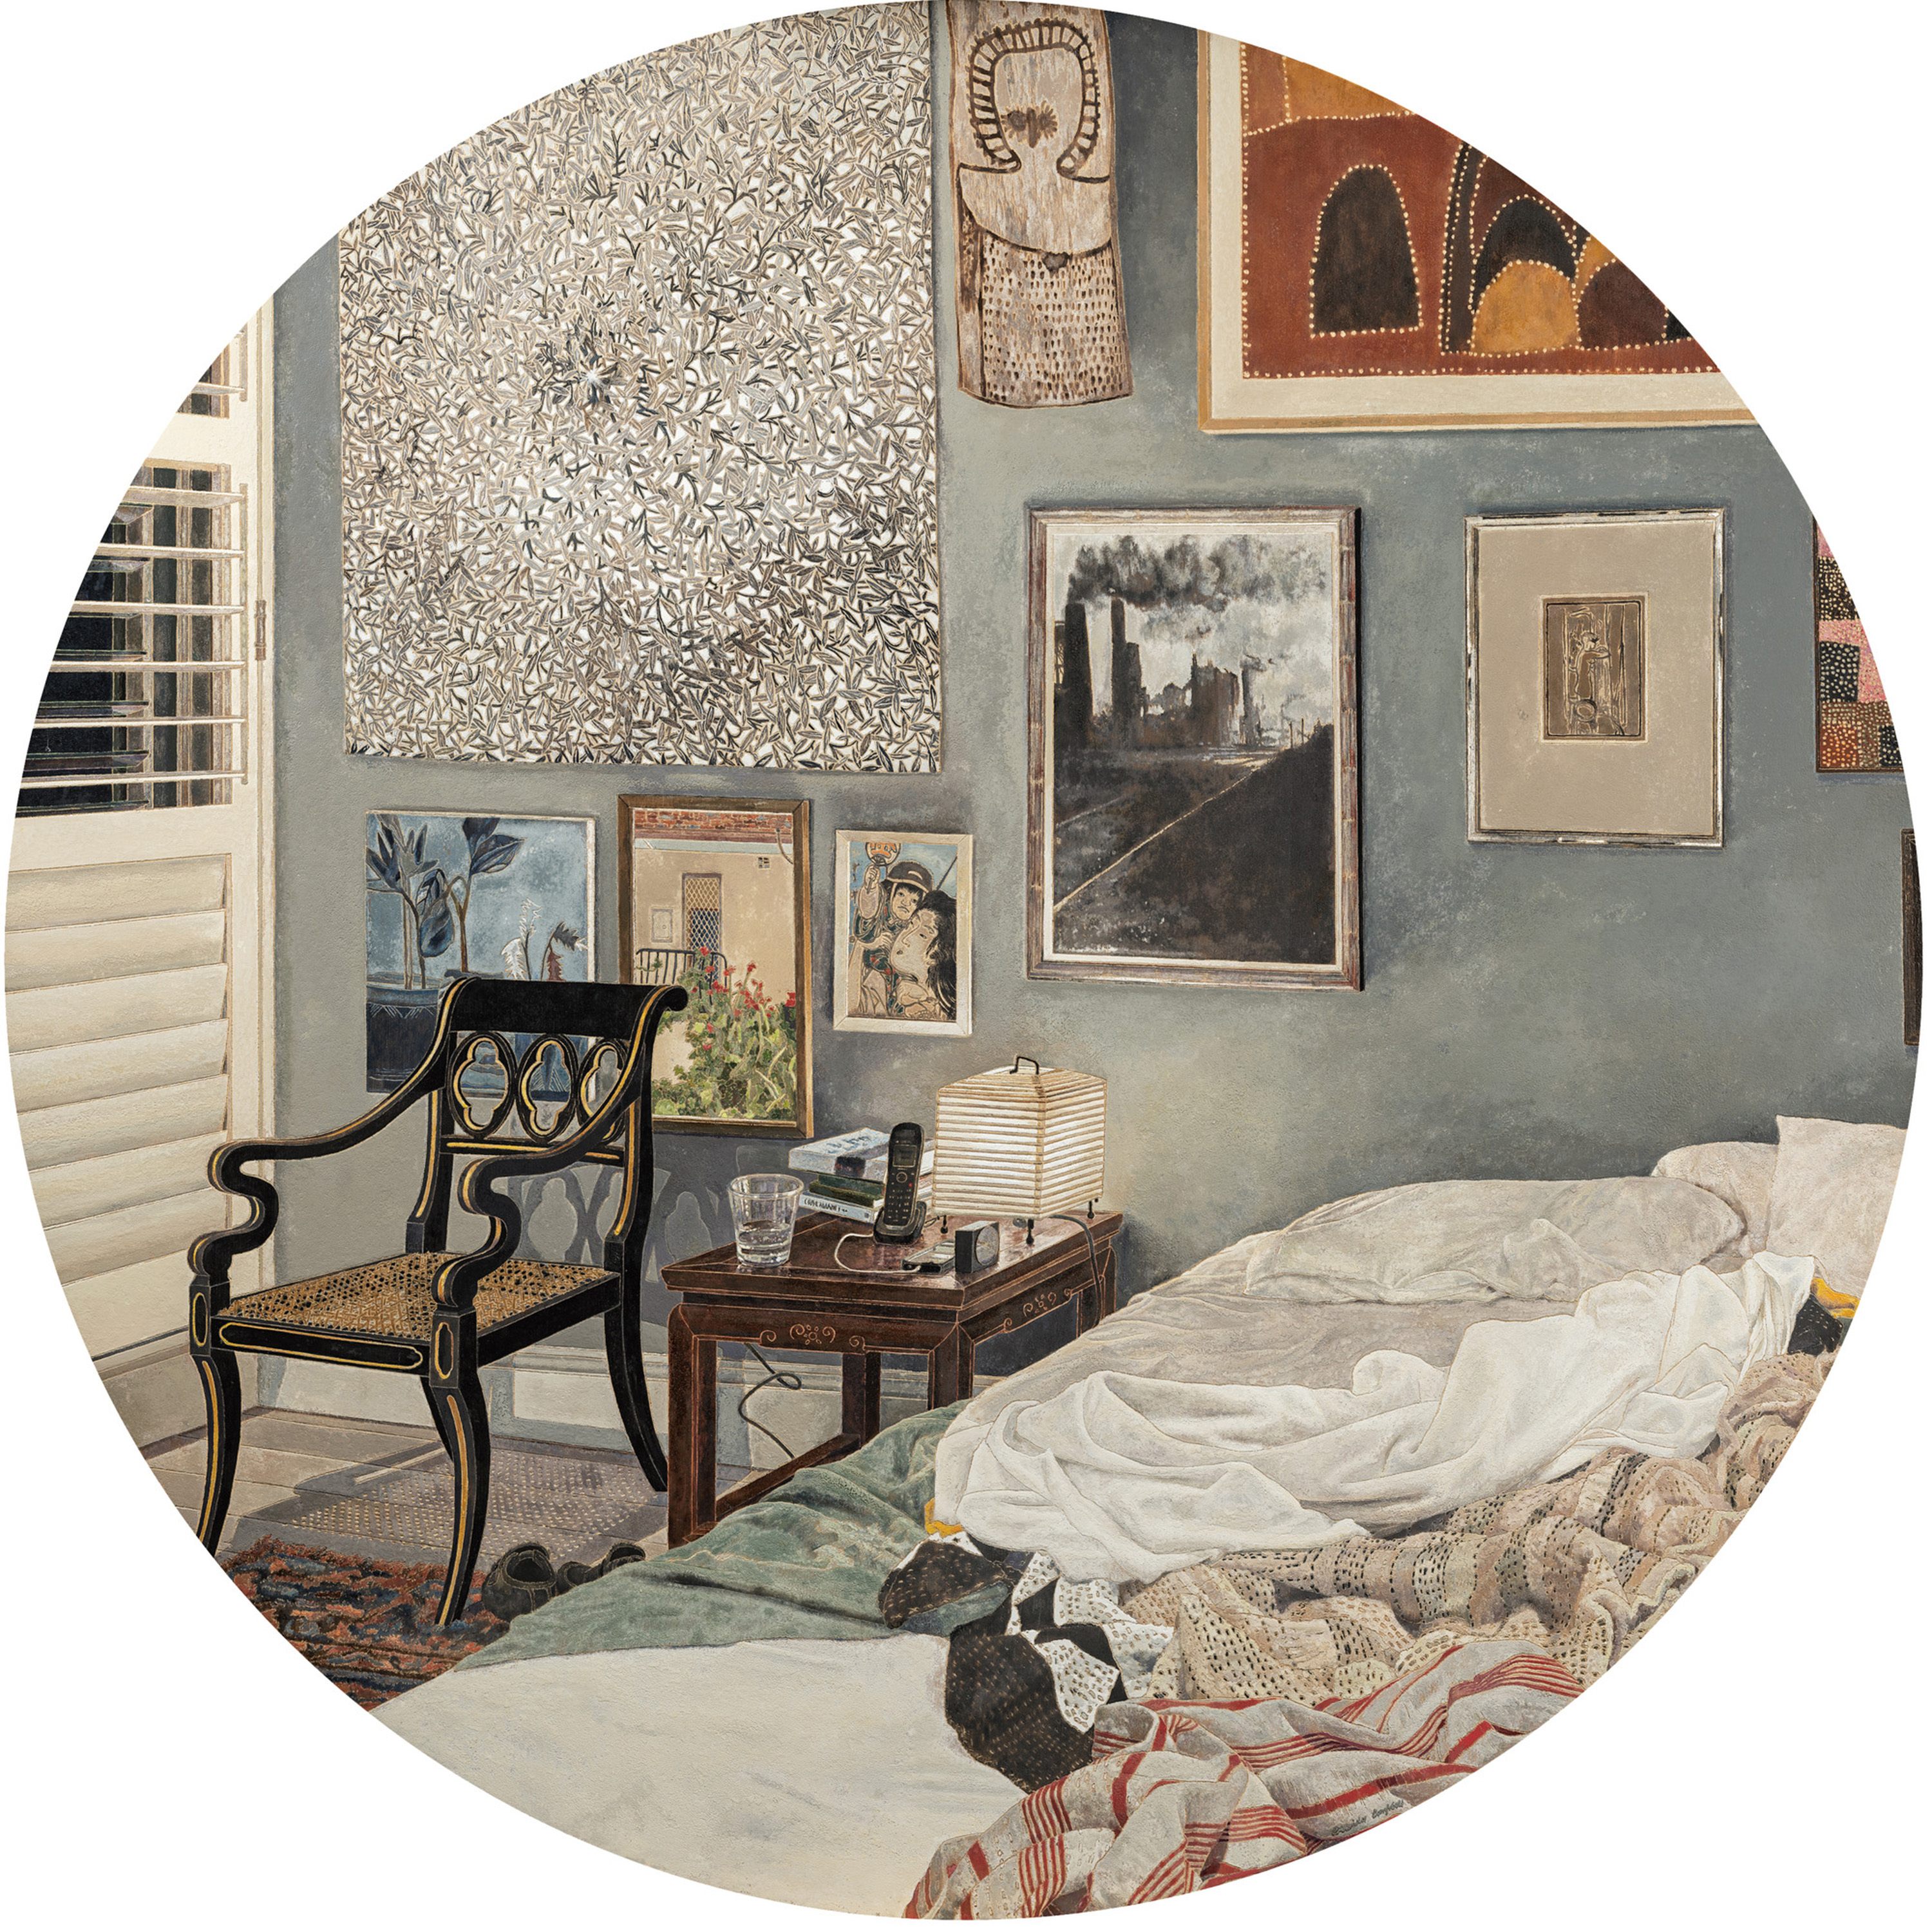 A circular painting of a bedroom, including a slept-in bed, bedside table, a chair, and a wall covered in art